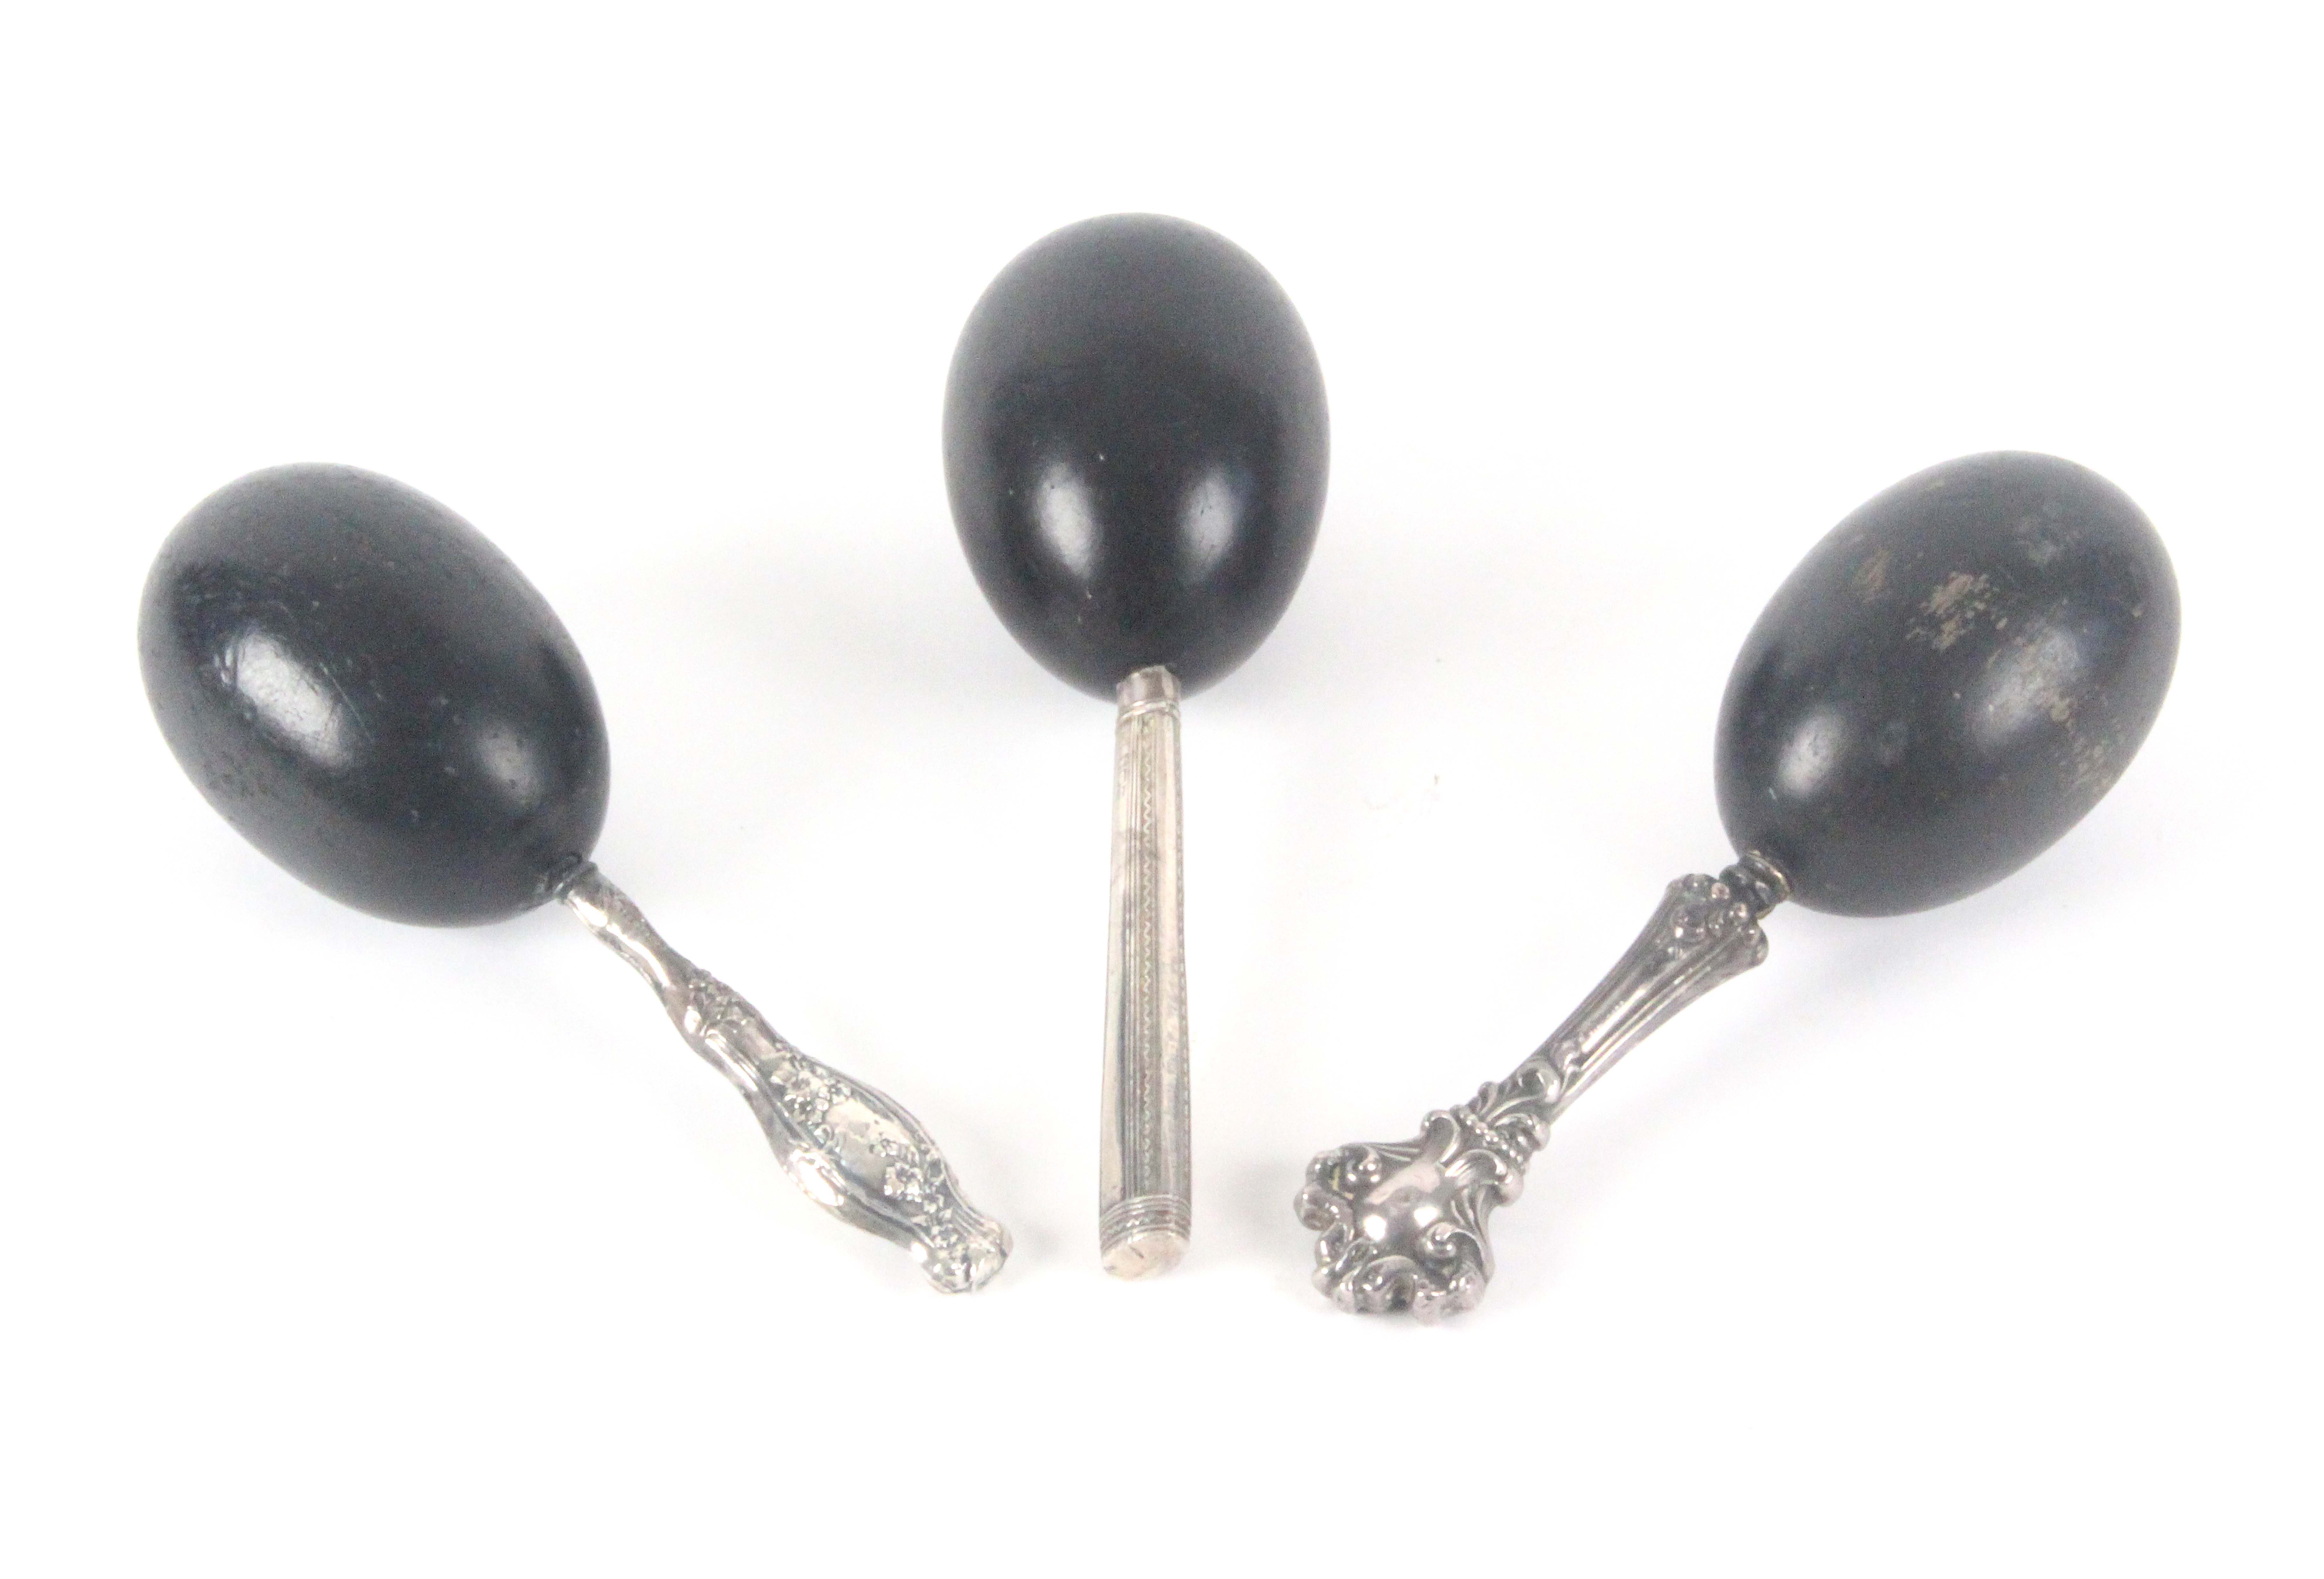 Three ebony egg form darners, two with decorative white metal handles stamped 'sterling', and